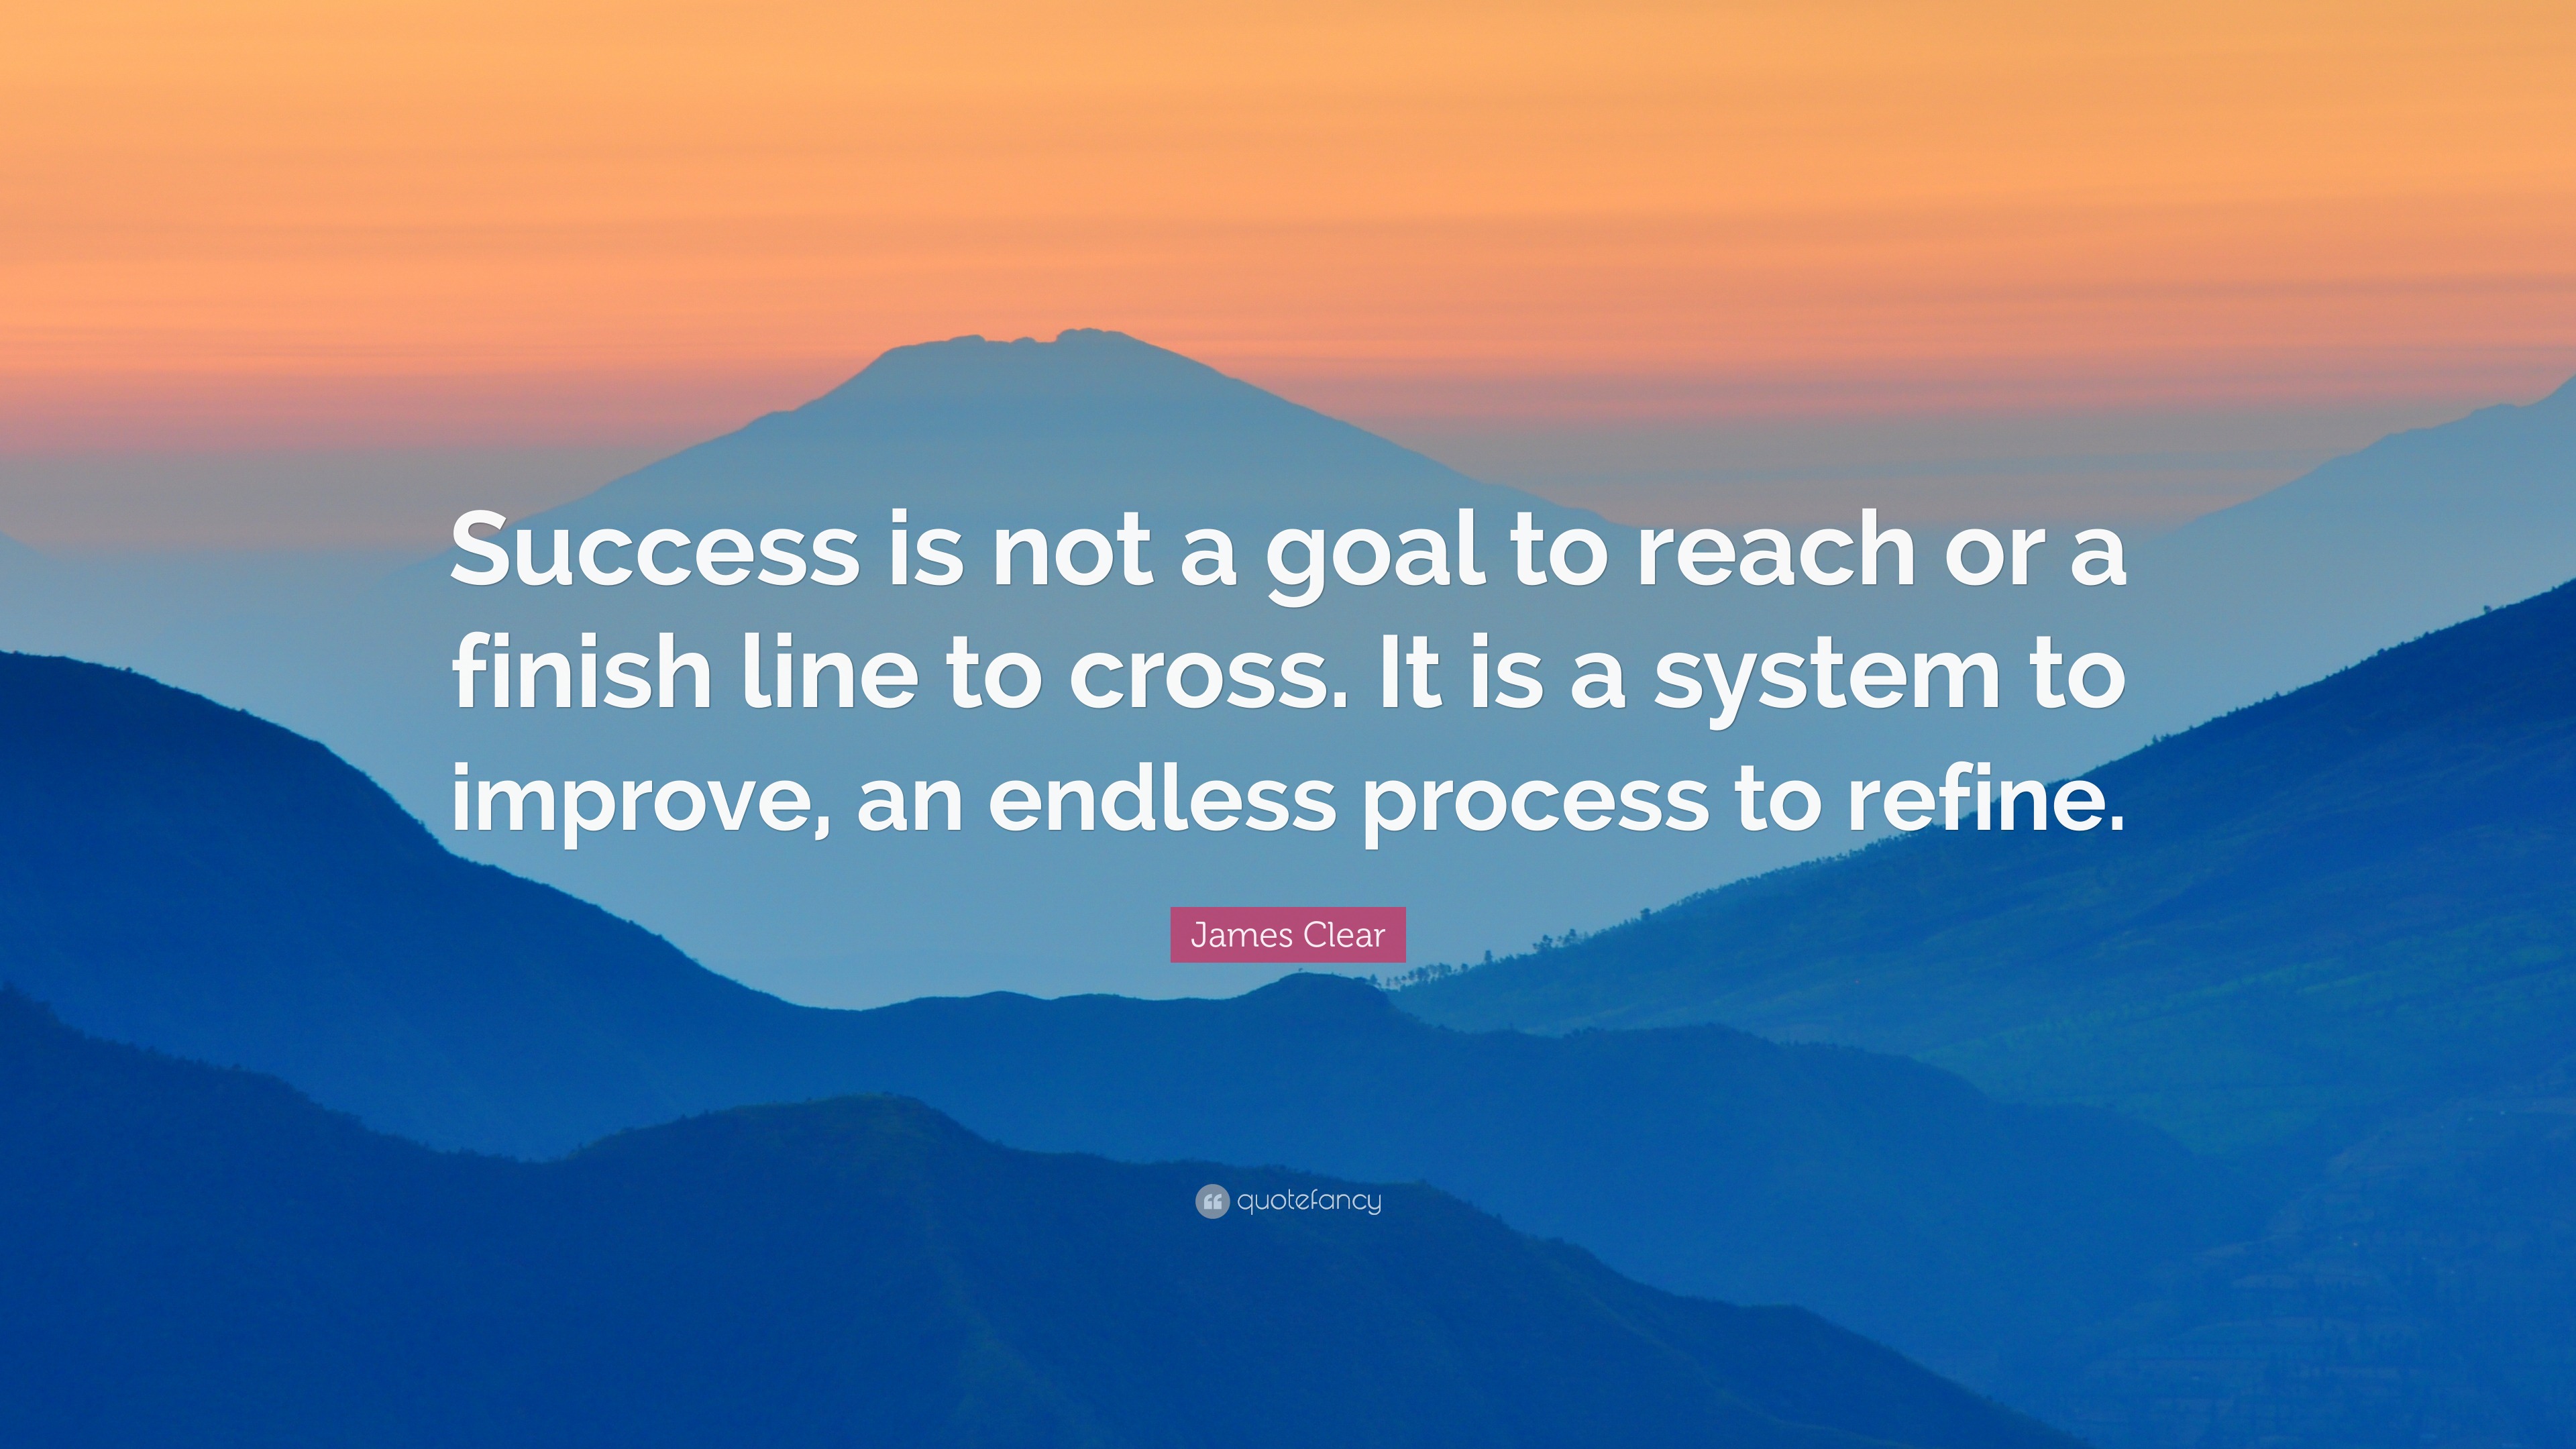 James Clear Quote: “Success is not a goal to reach or a finish line to ...